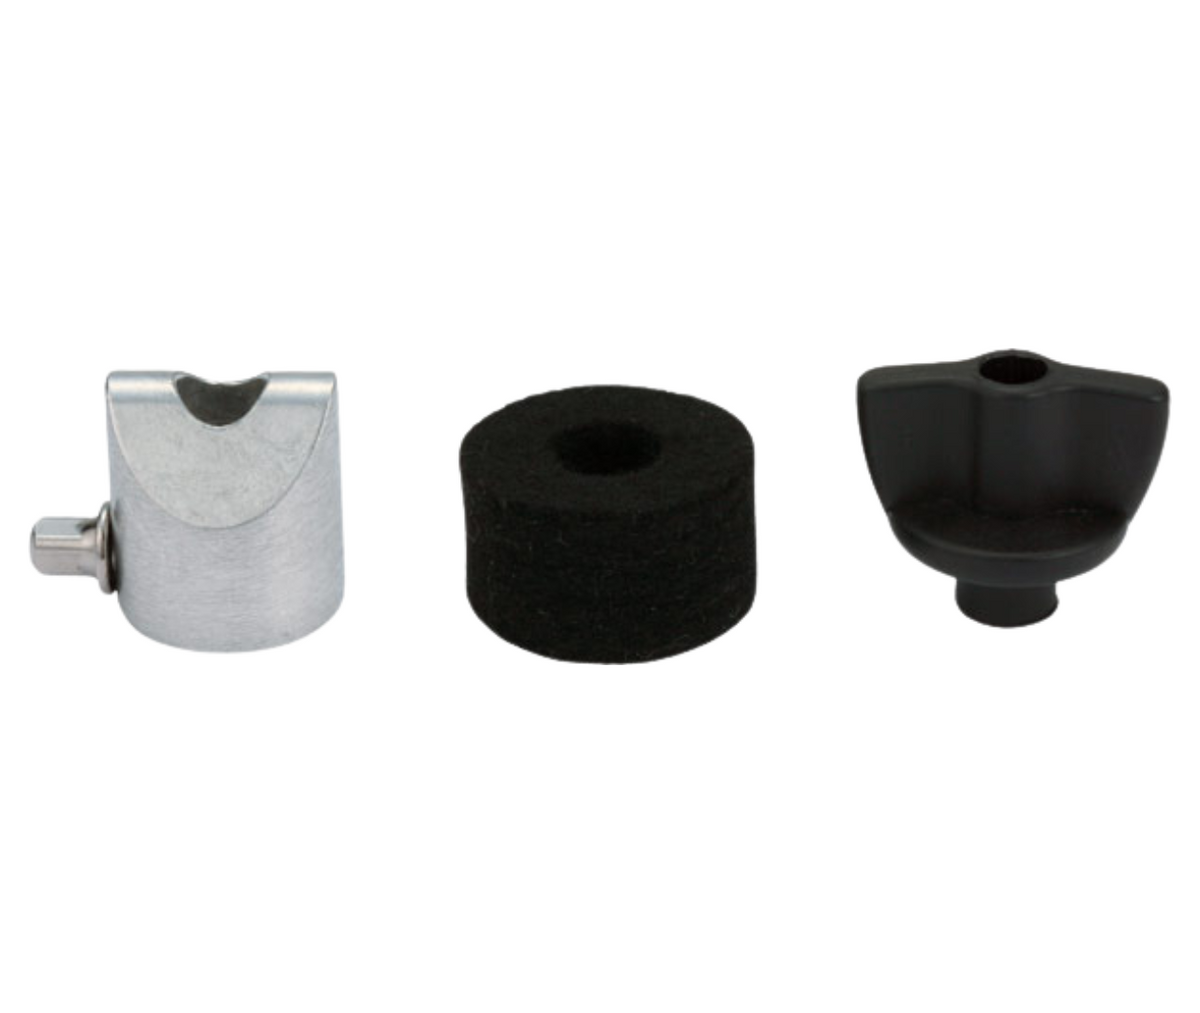 Roland CYM-10 Cymbal Drum Parts Set Repair-parts Package Includes Stopper, Felt Washer, and Wing Nut